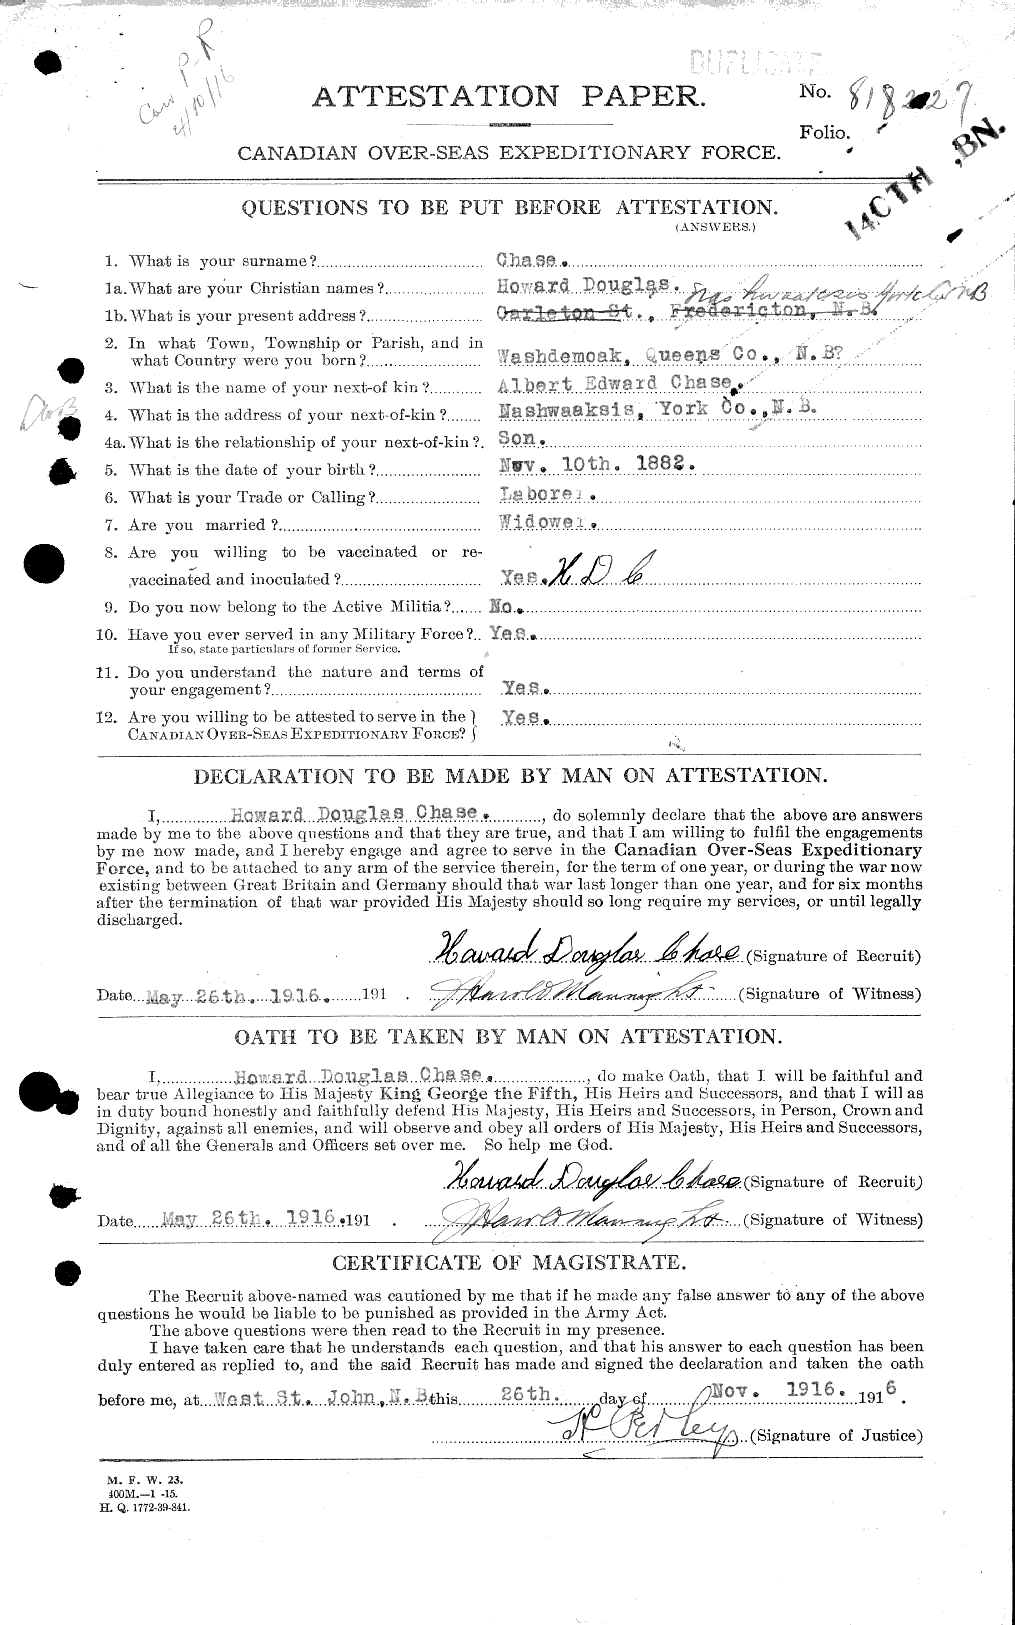 Personnel Records of the First World War - CEF 016021a